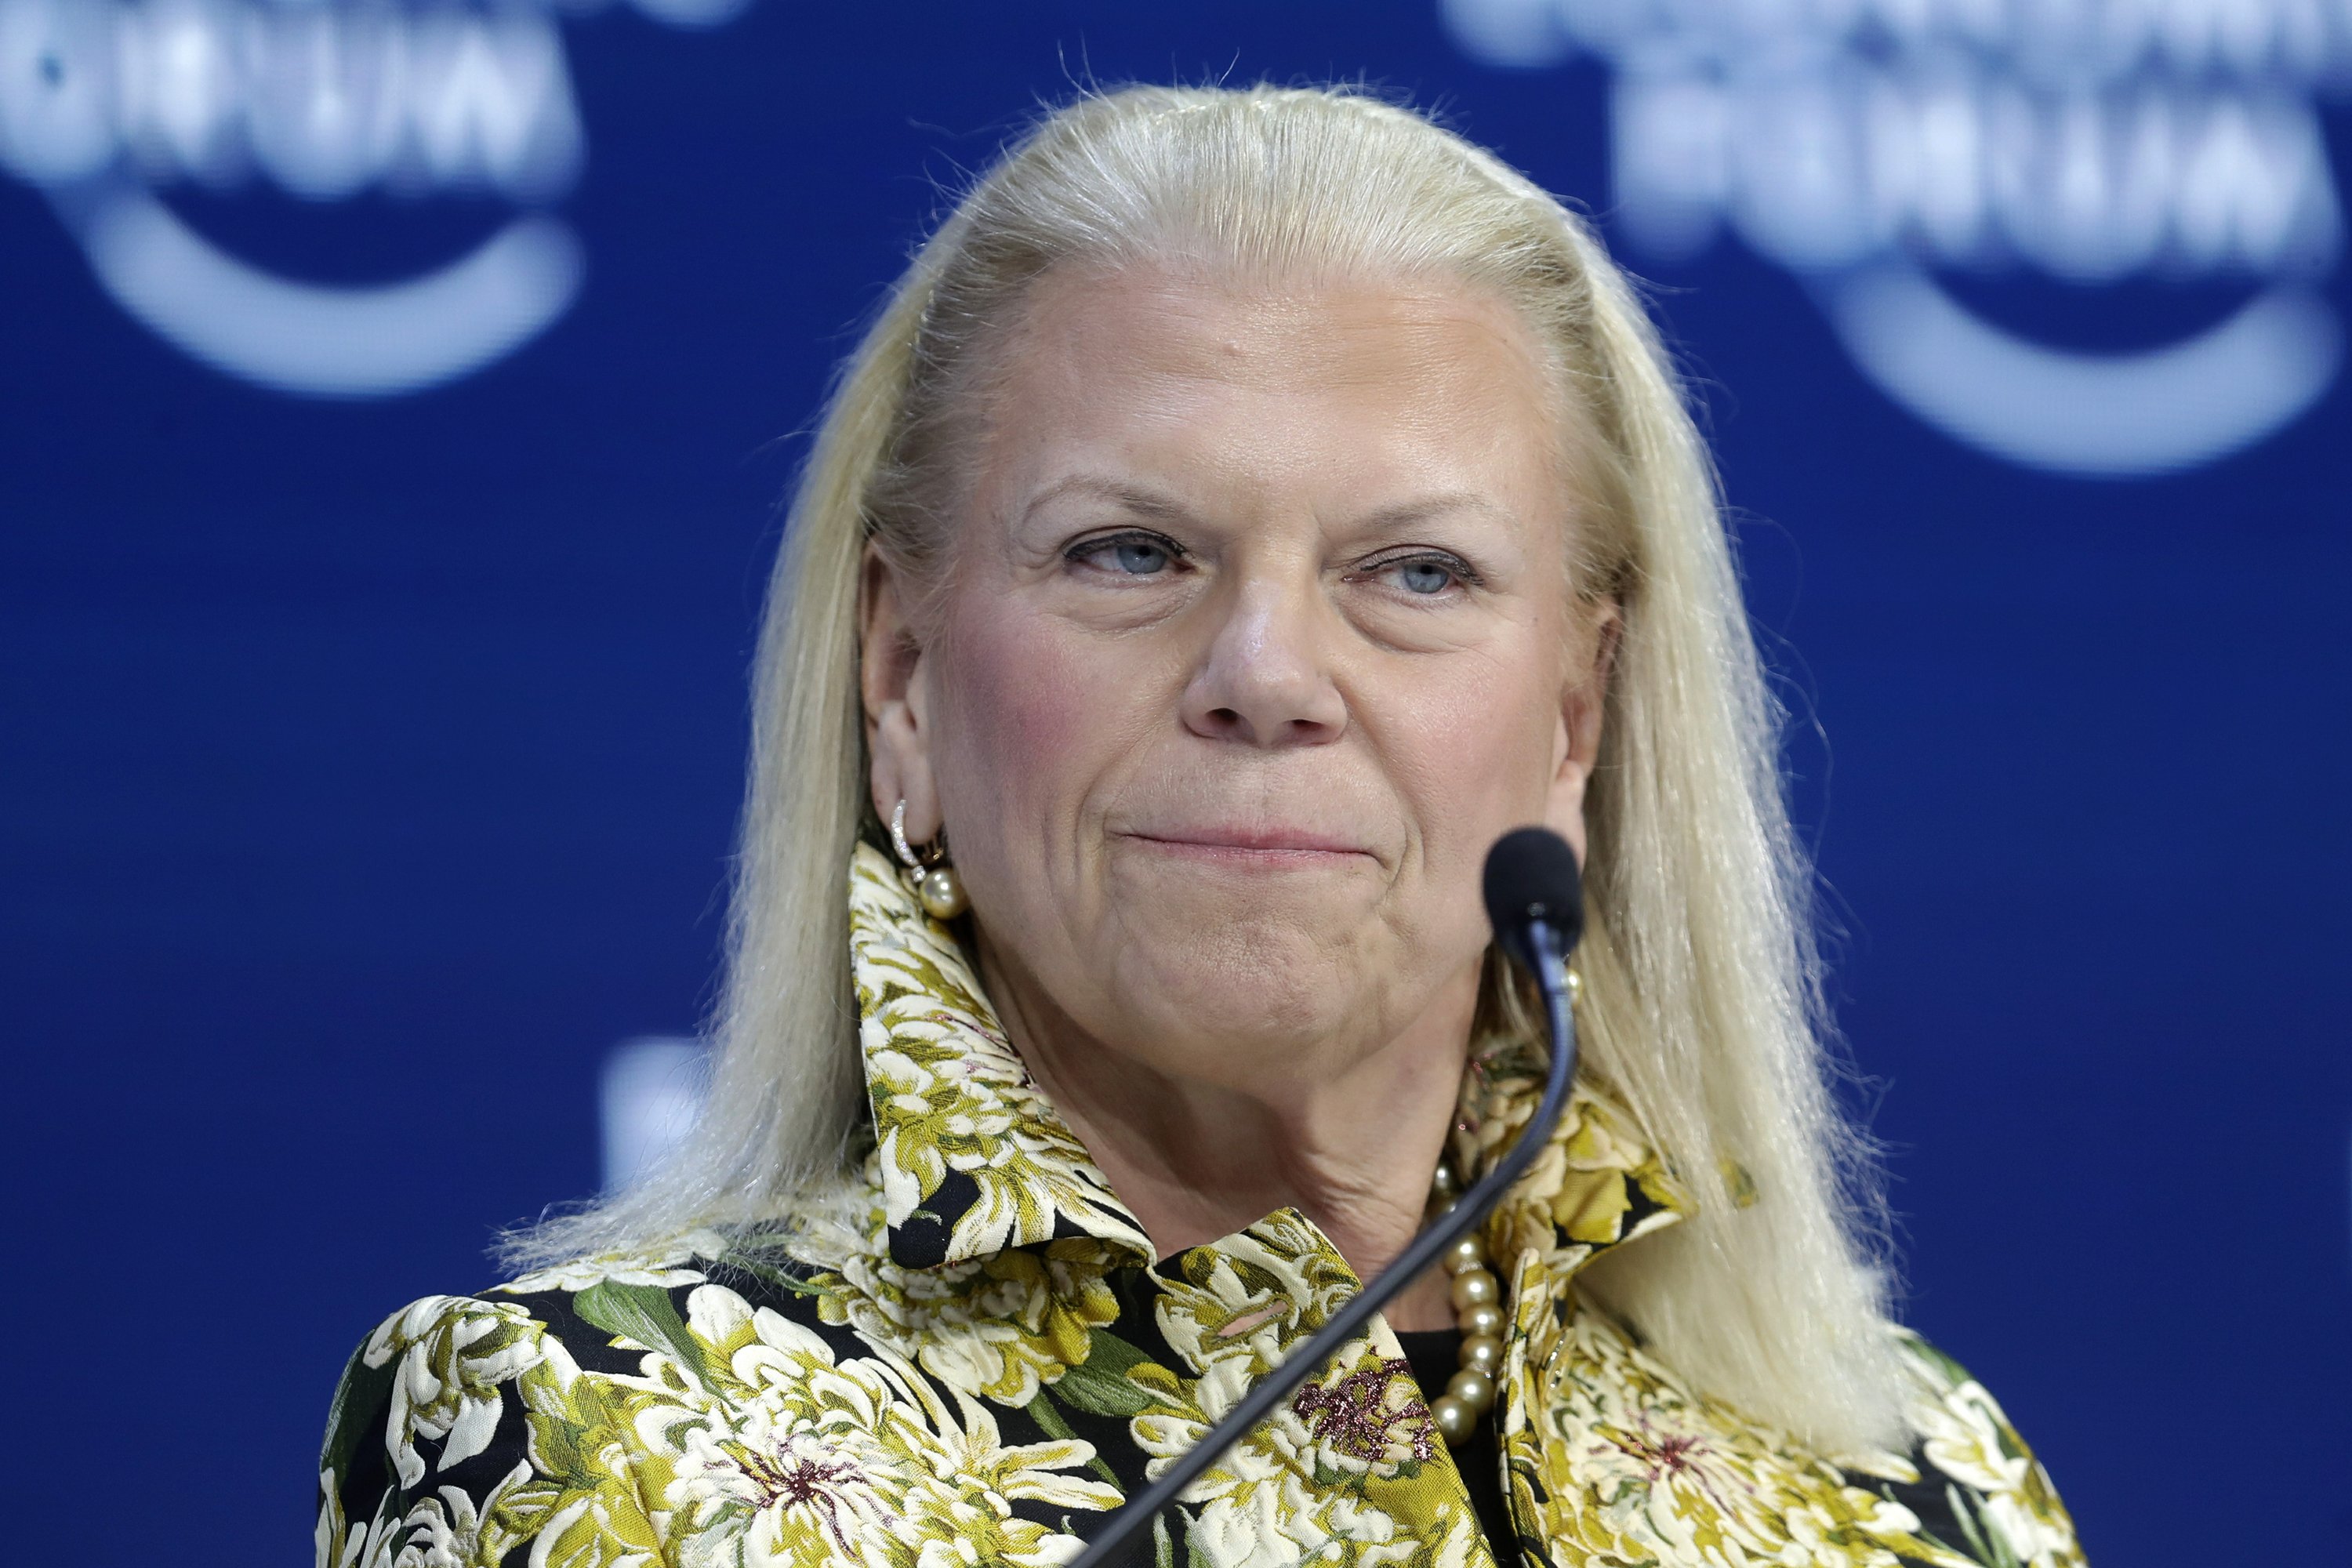 Ginni Rometty, 1st female CEO at IBM, to step down in April | AP News